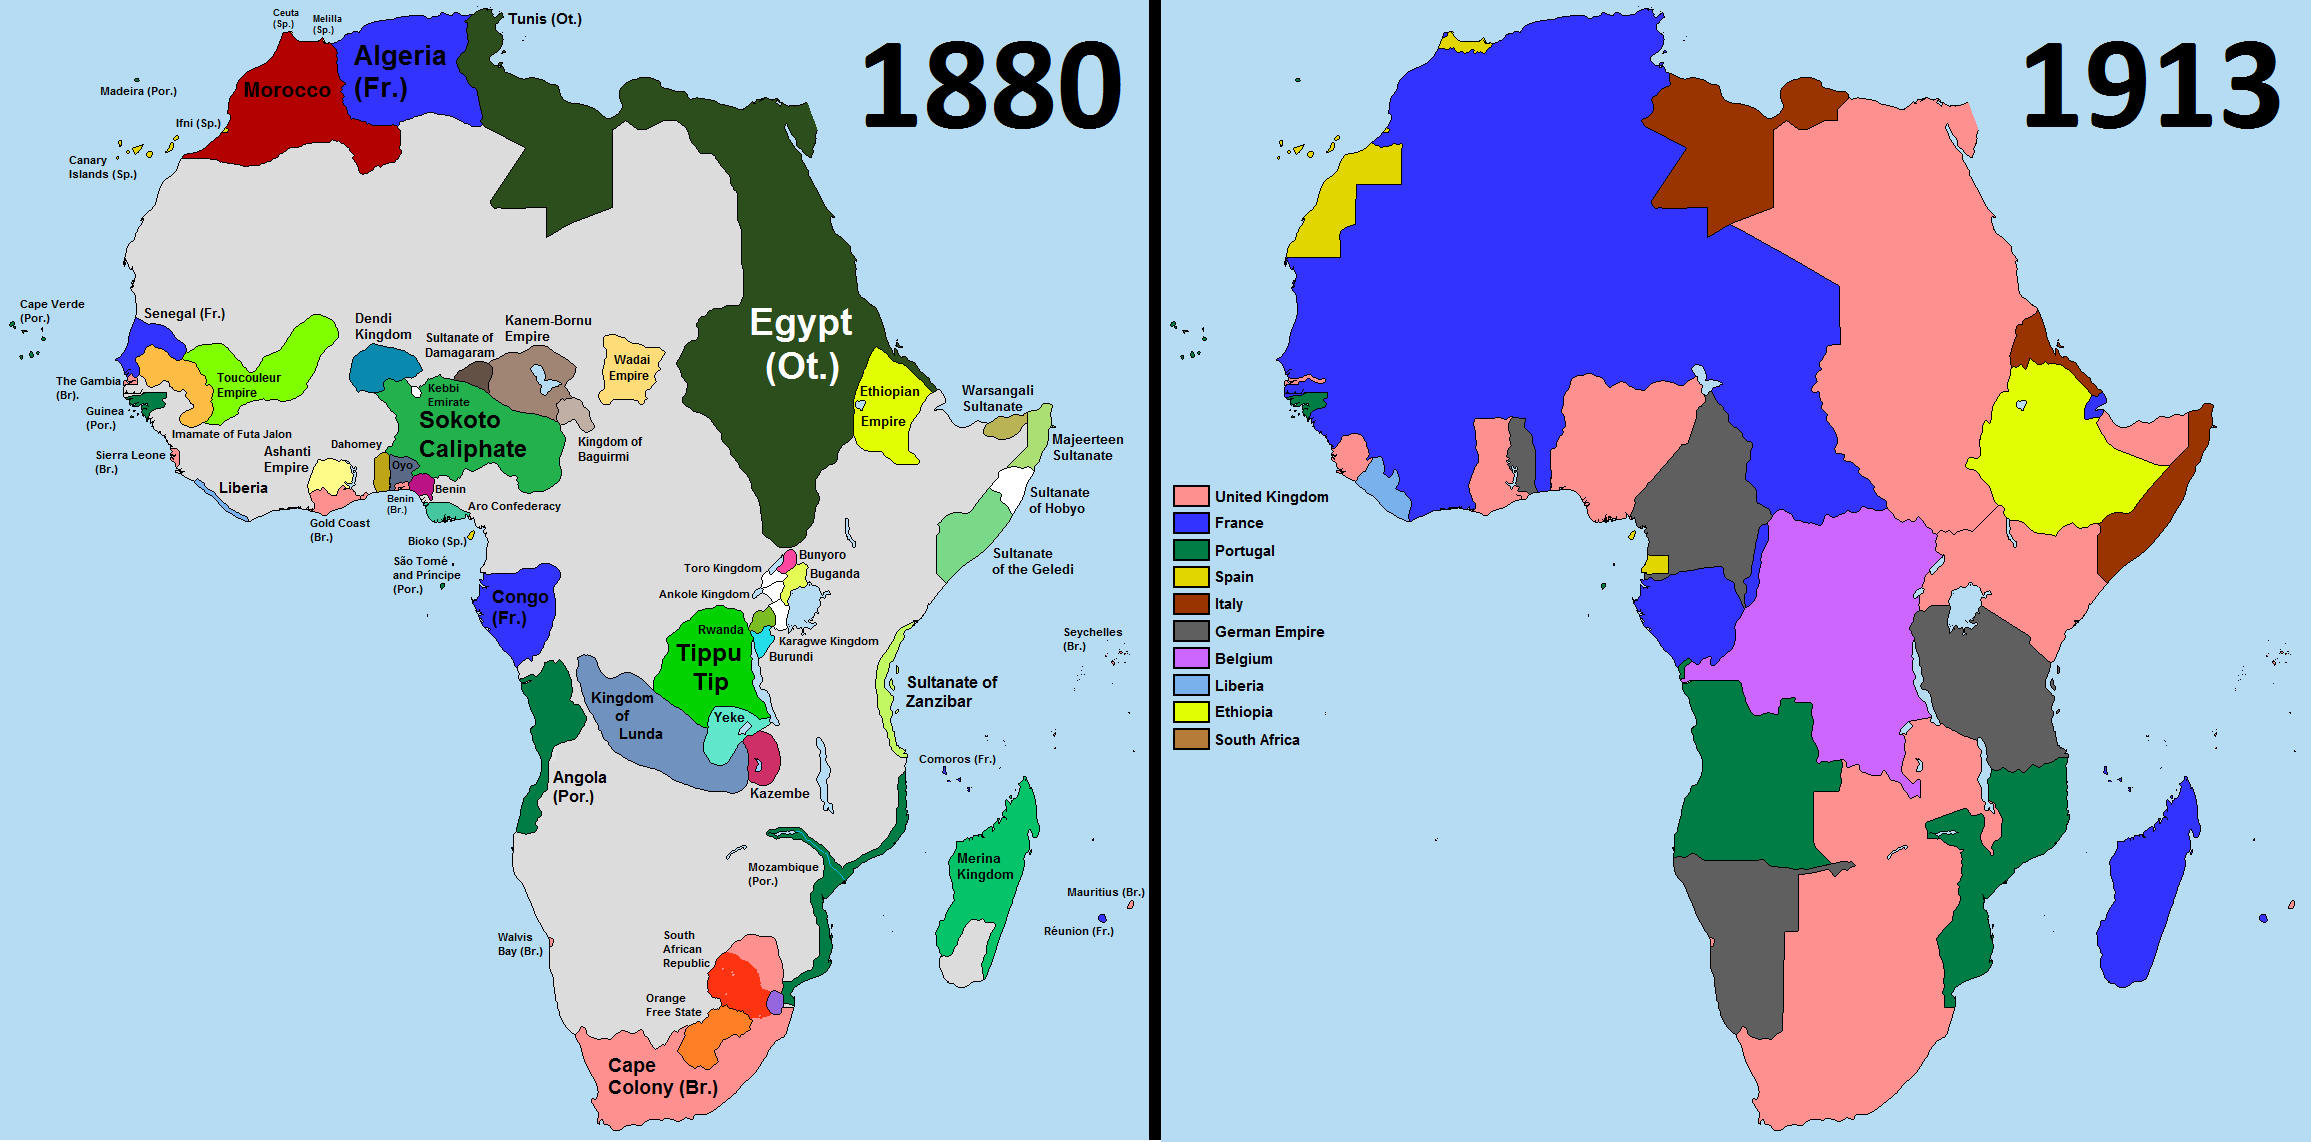 National sovereignty in Africa following the colonial claims made during the Berlin Conference of 1884-85 [11].